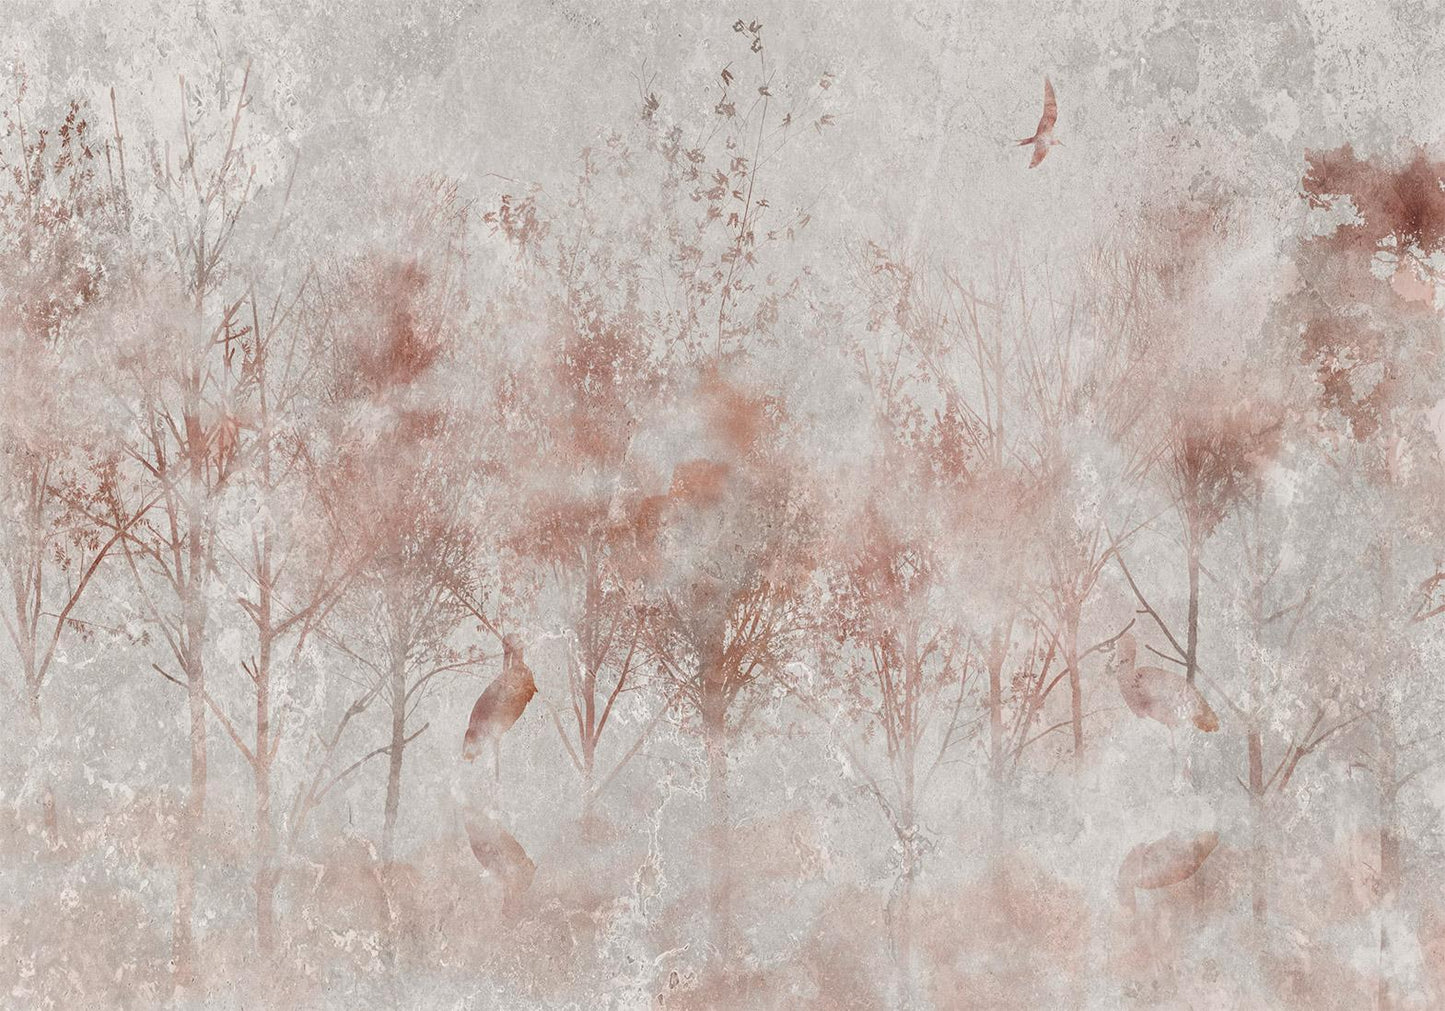 Fotobehang - Autumn landscape - abstract with trees and birds on a textured background